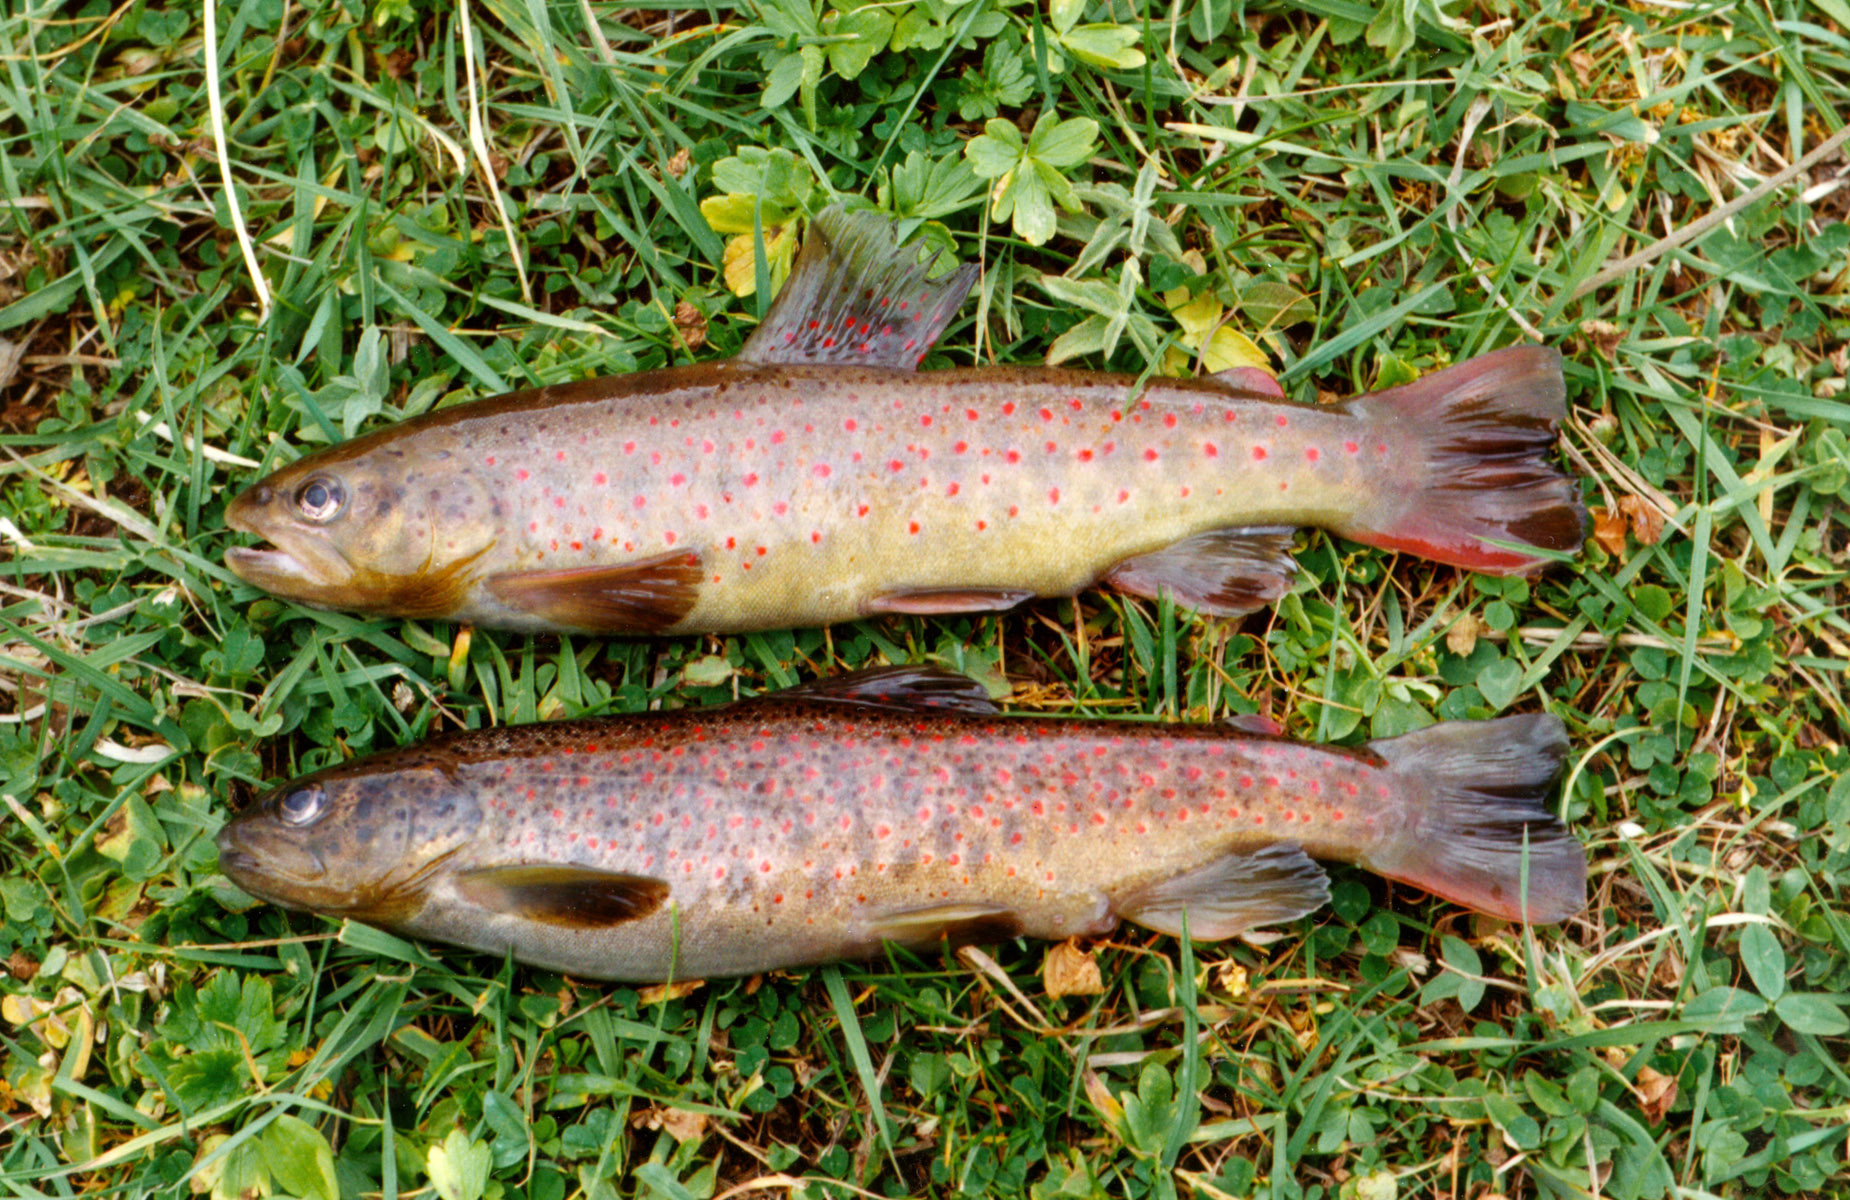 Liqvan Chay trout, ca, 27.0 cm total length, 4 October 1994, courtesy of Asghar Abdoli 